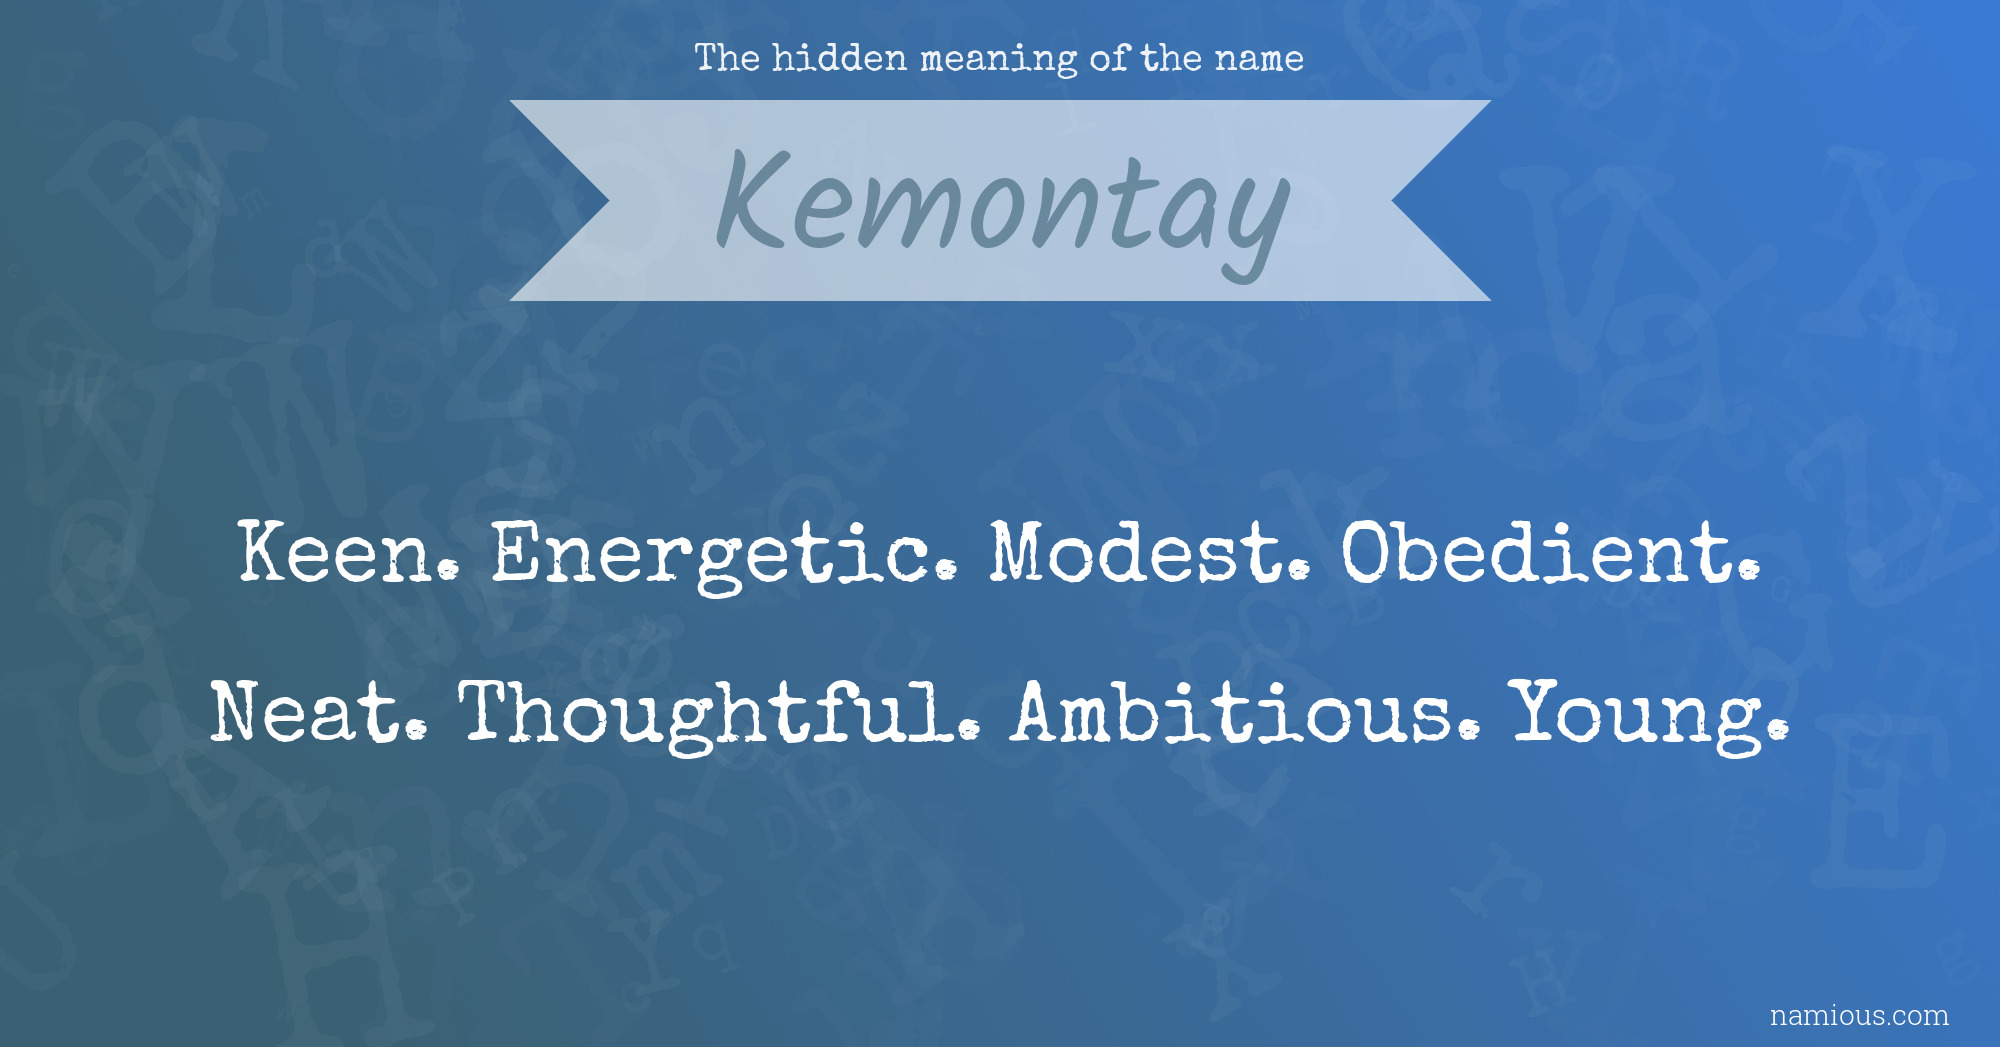 The hidden meaning of the name Kemontay